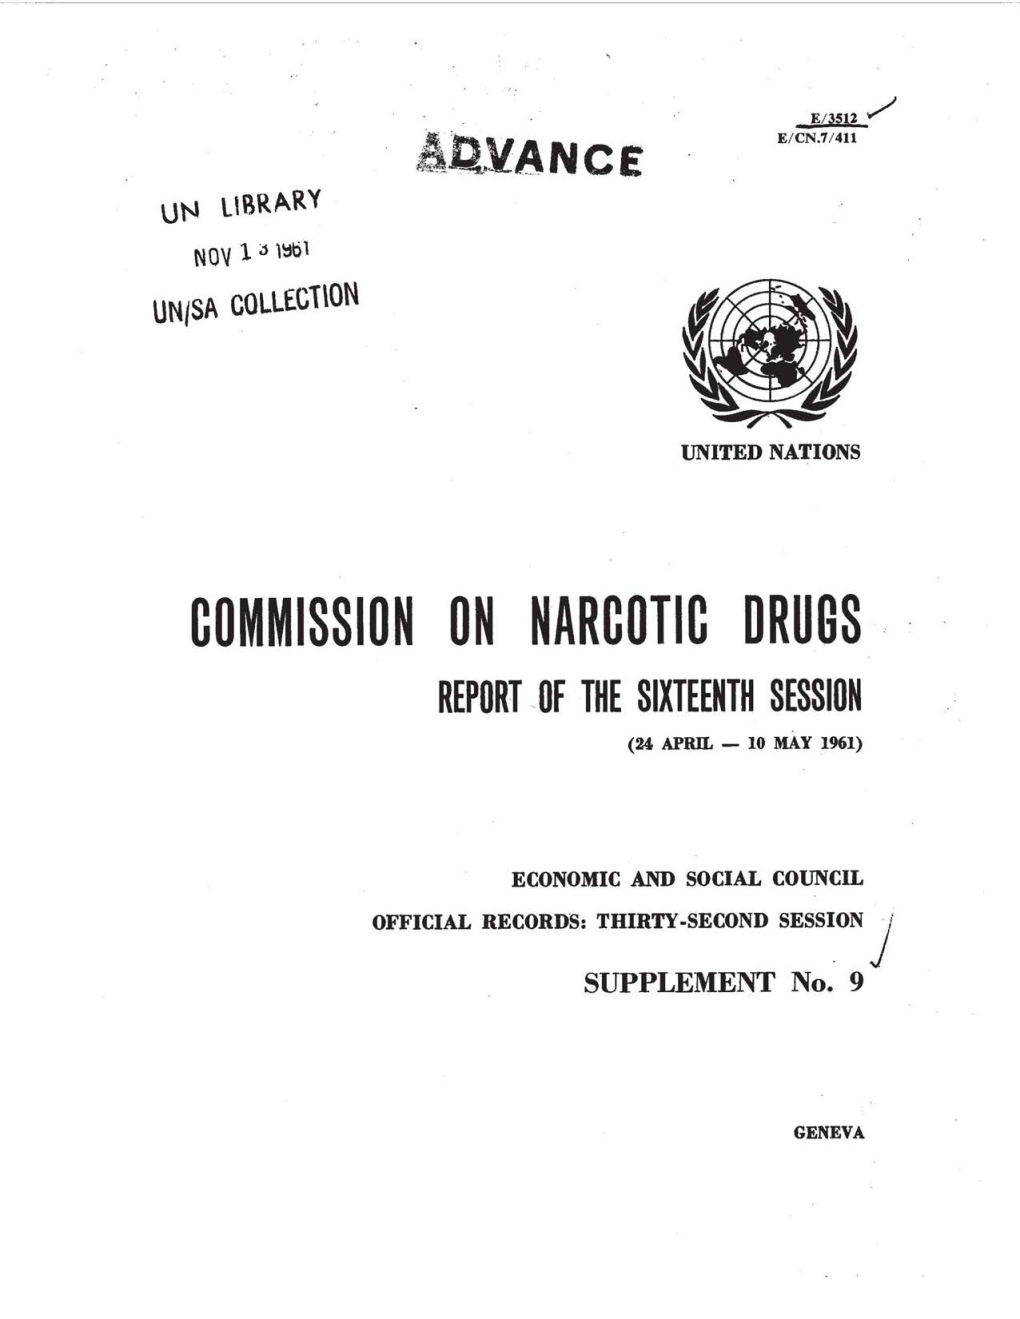 Commission on Narcotic Drugs Report of the Sixteenth Session (24 April - 10 May 1961)